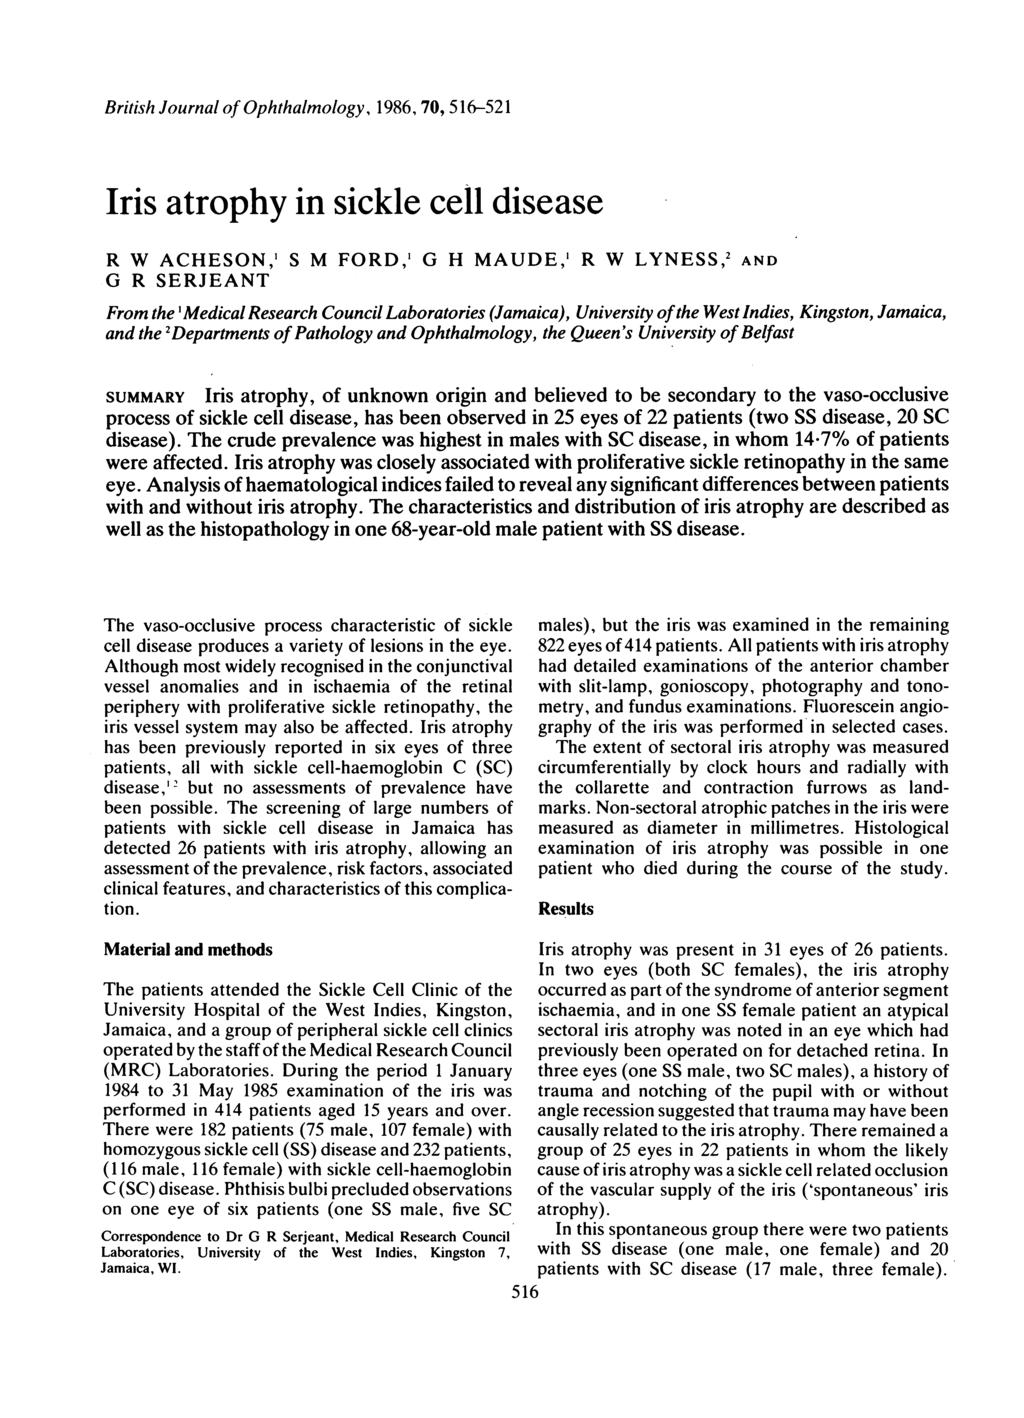 British Journal of Ophthalmology, 1986, 70, 516-521 R W ACHESON,' S M FORD,' G H MAUDE,' R W LYNESS,2 AND G R SERJEANT From the 'Medical Research Council Laboratories (Jamaica), University ofthe West